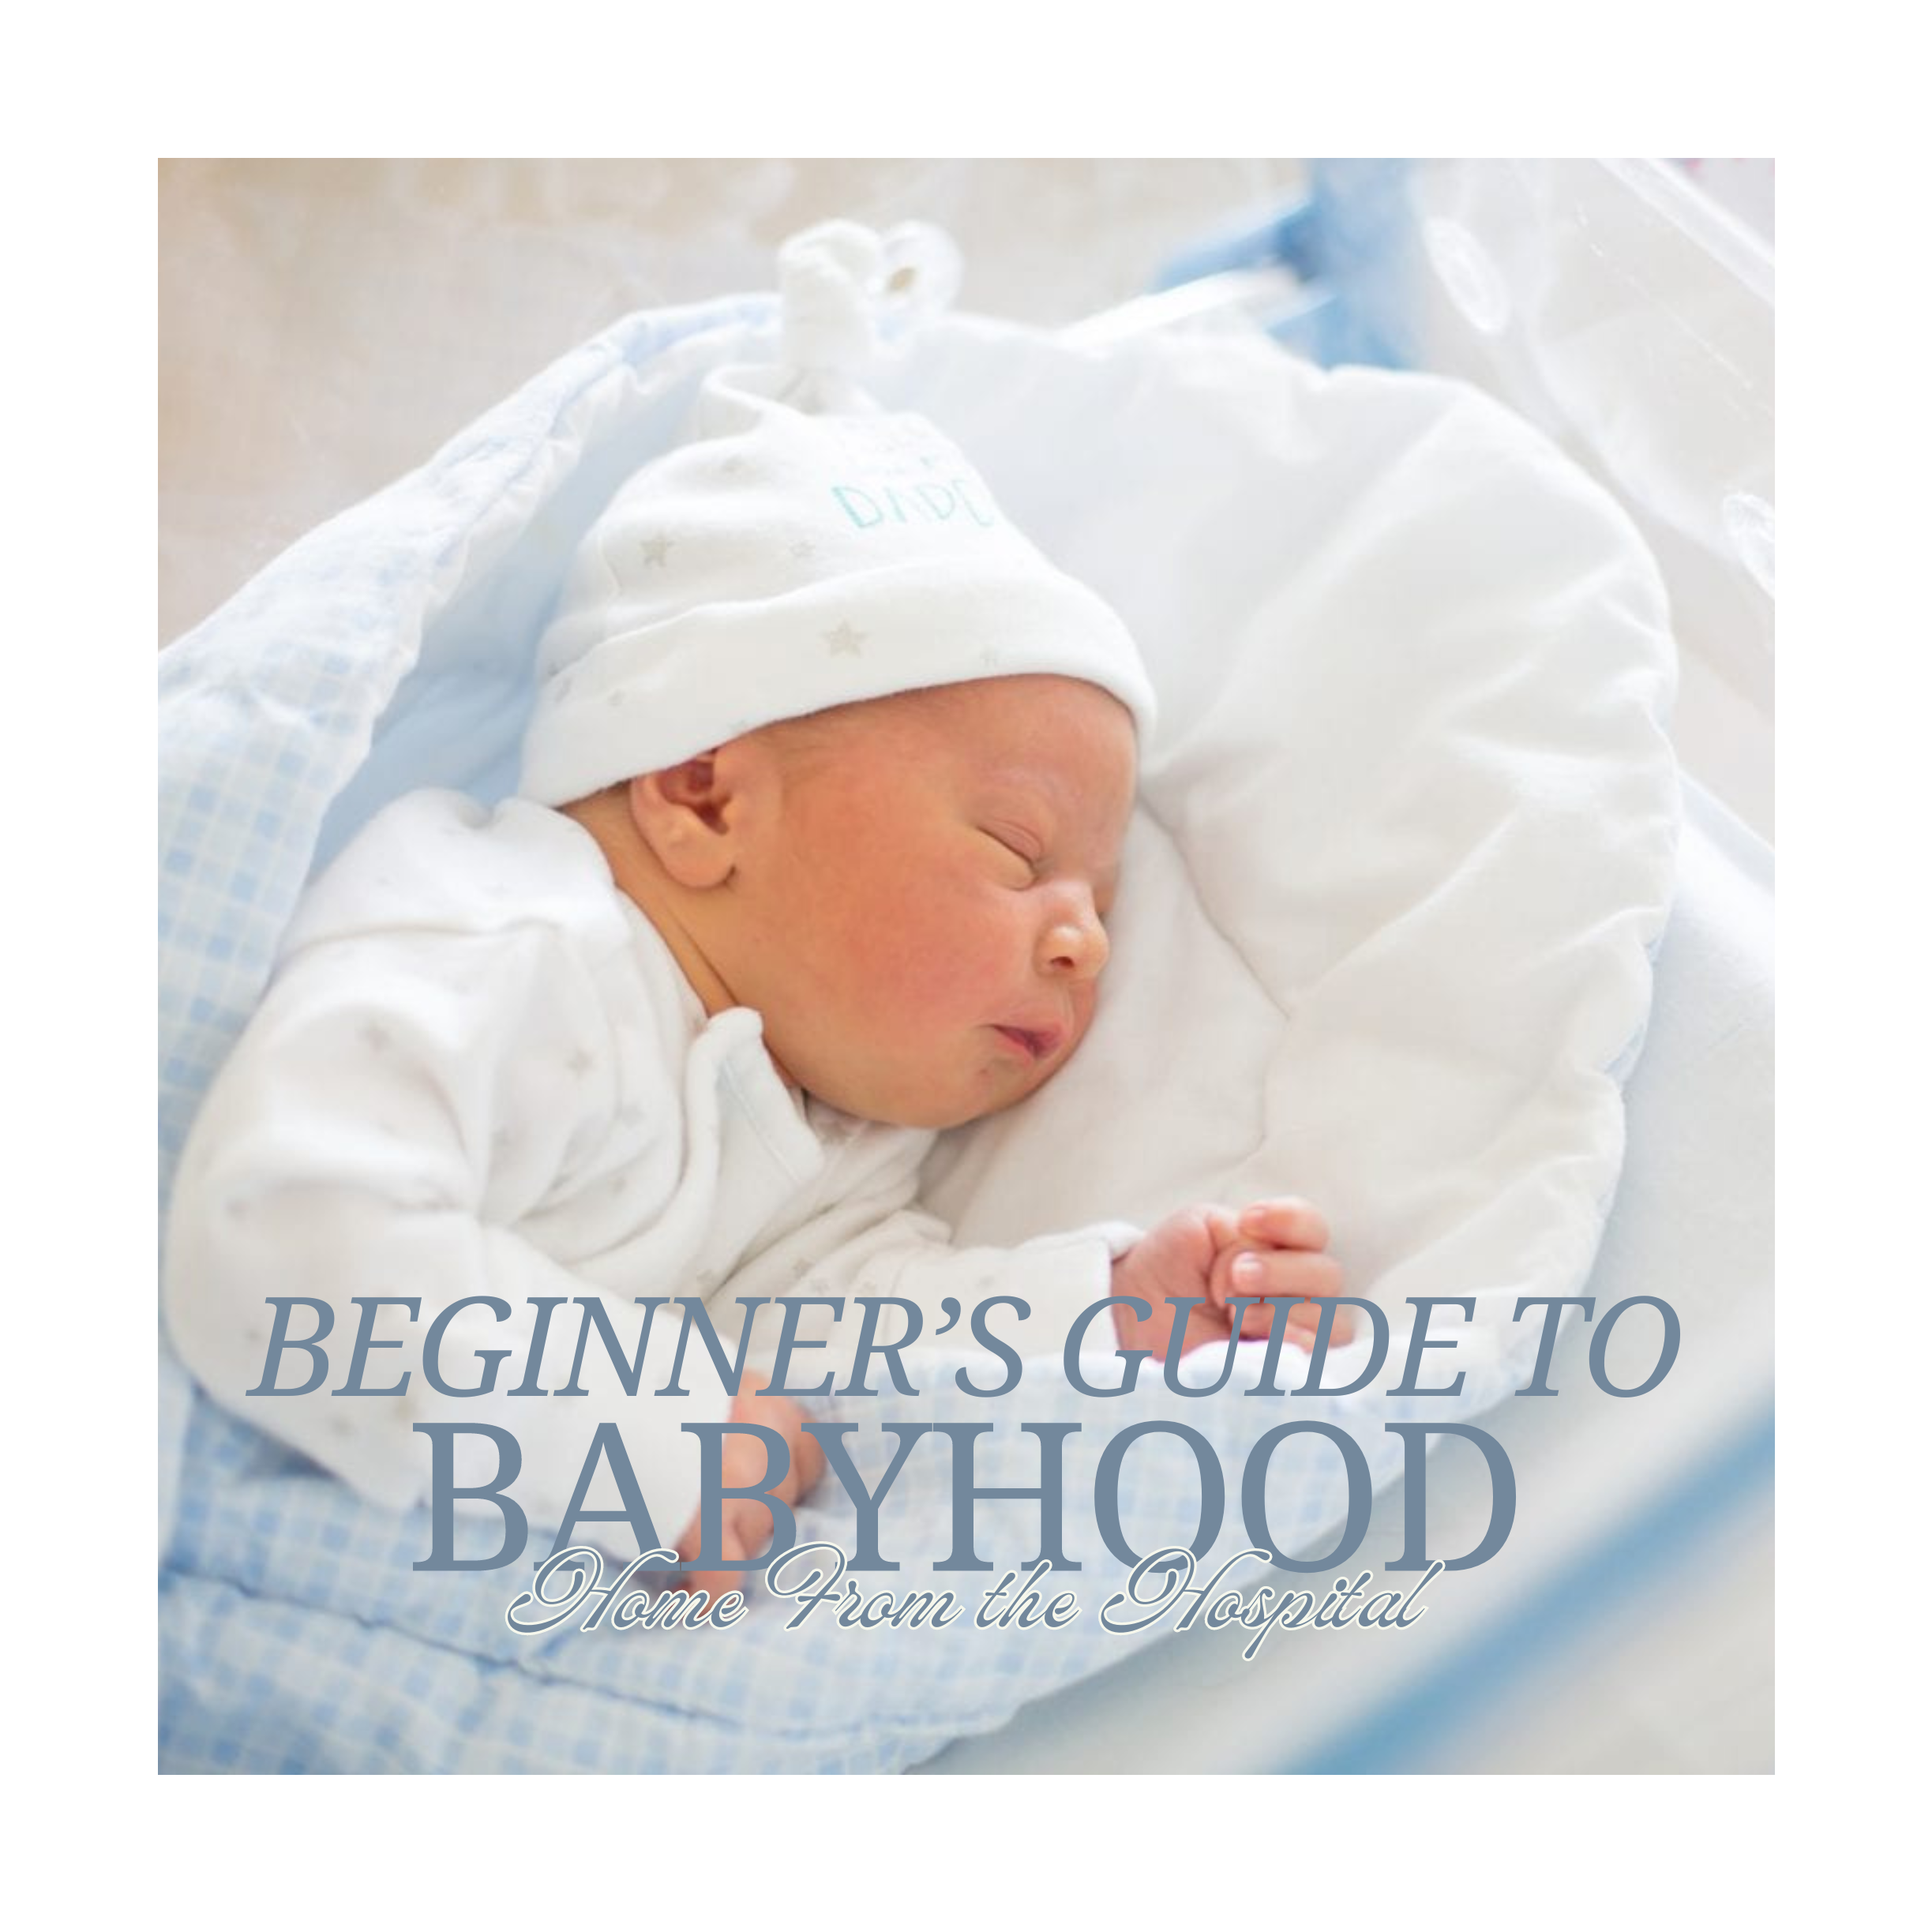 Beginner's Guide to Babyhood: Birth to 6 Months - Home From The Hospital